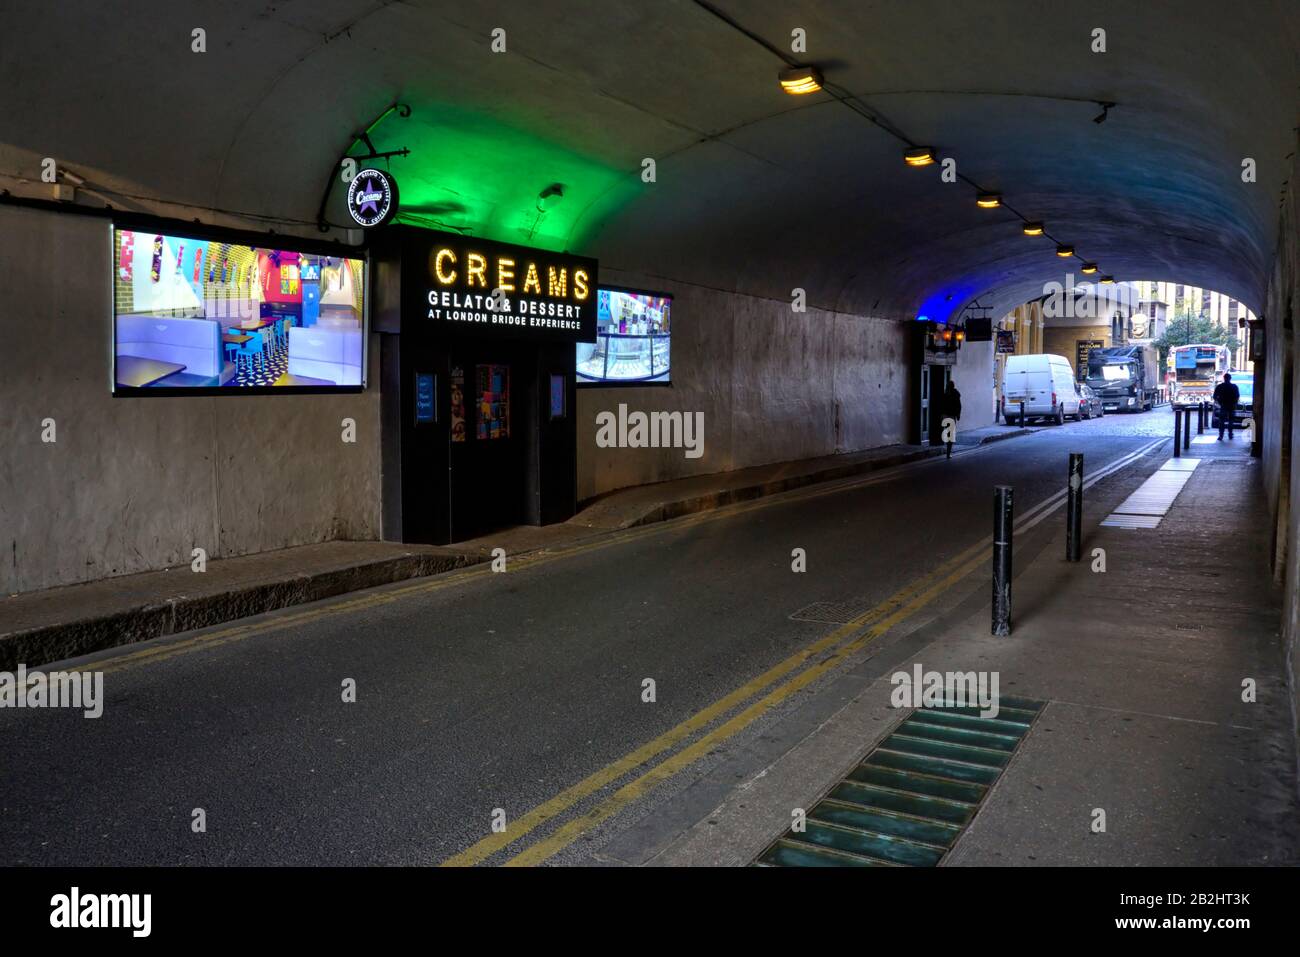 London, United Kingdom - April 15, 2019: The Anchor public house adjacent to the River Thames with some motion blurred pedestrians. Stock Photo